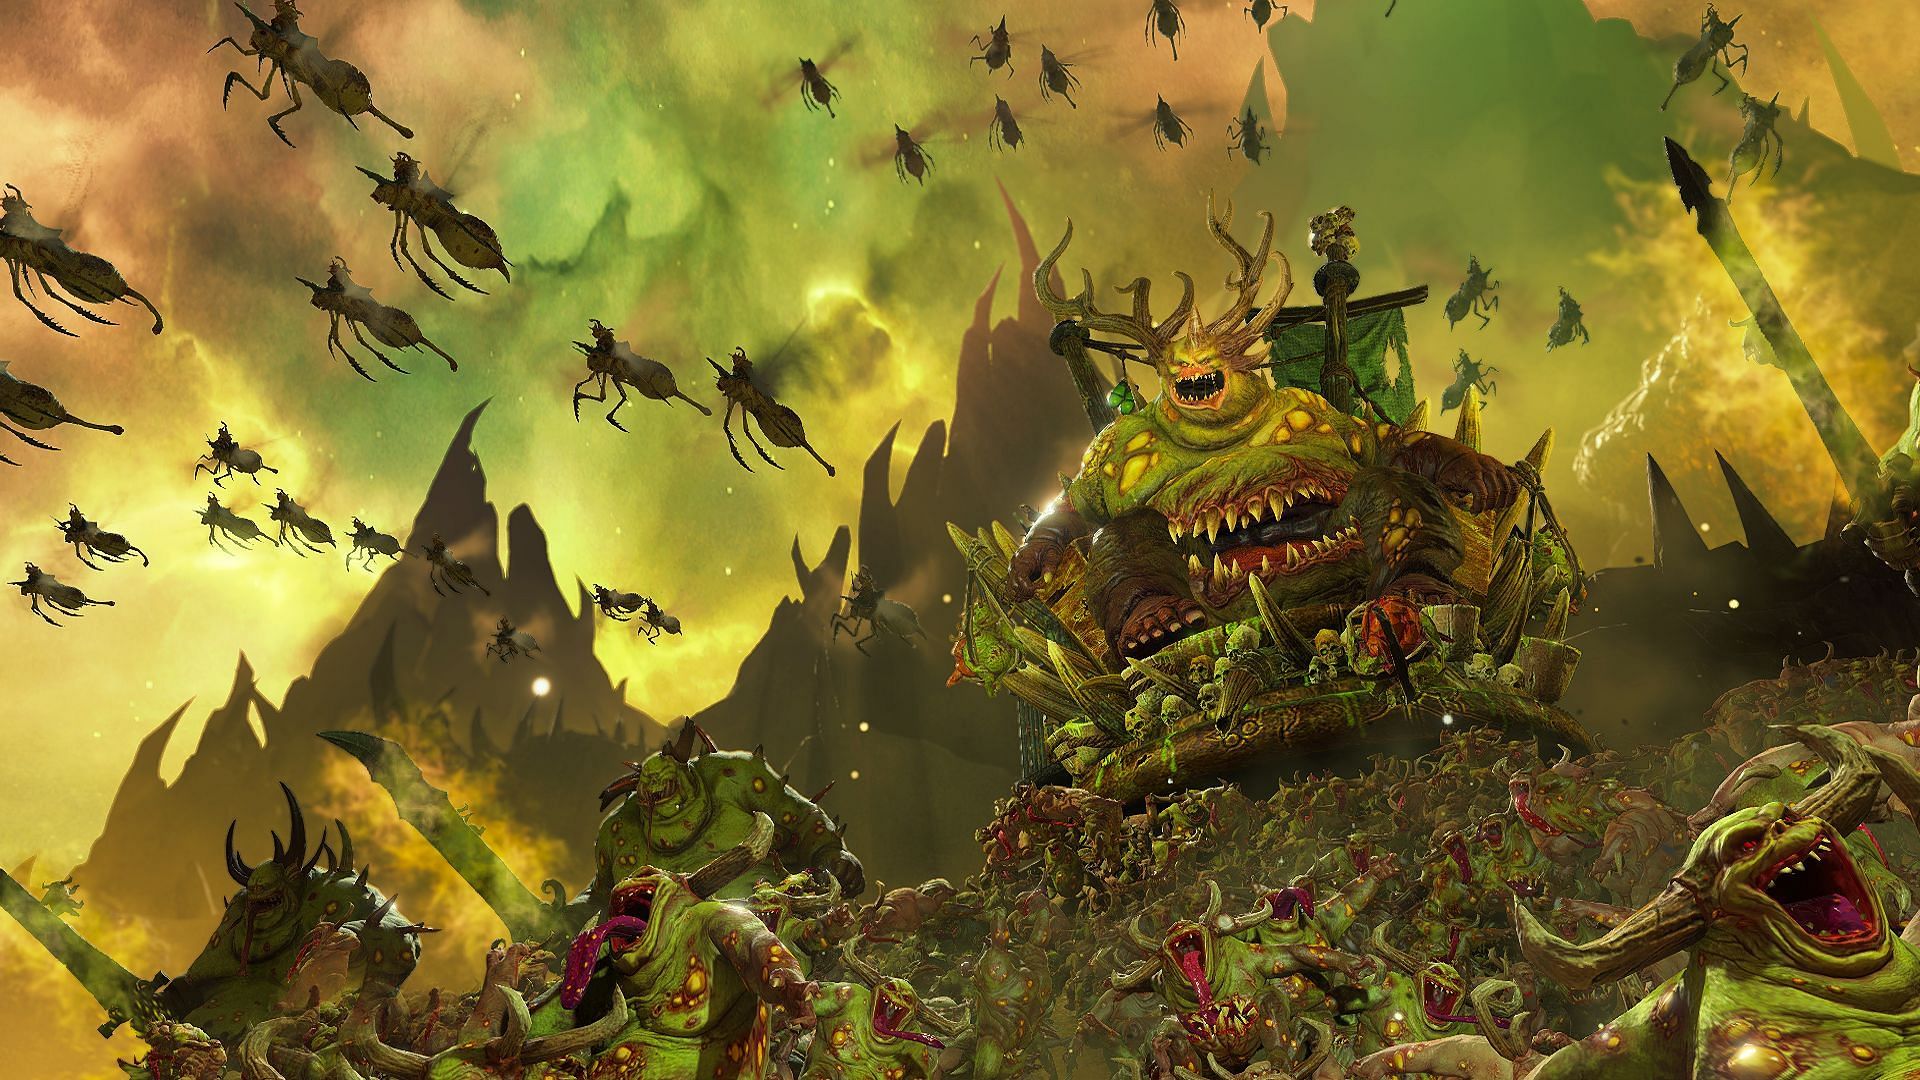 By combining the forces of all the Chaos Gods, players can create an unstoppable force in Total War: Warhammer 3. Image via Creative Assembly.